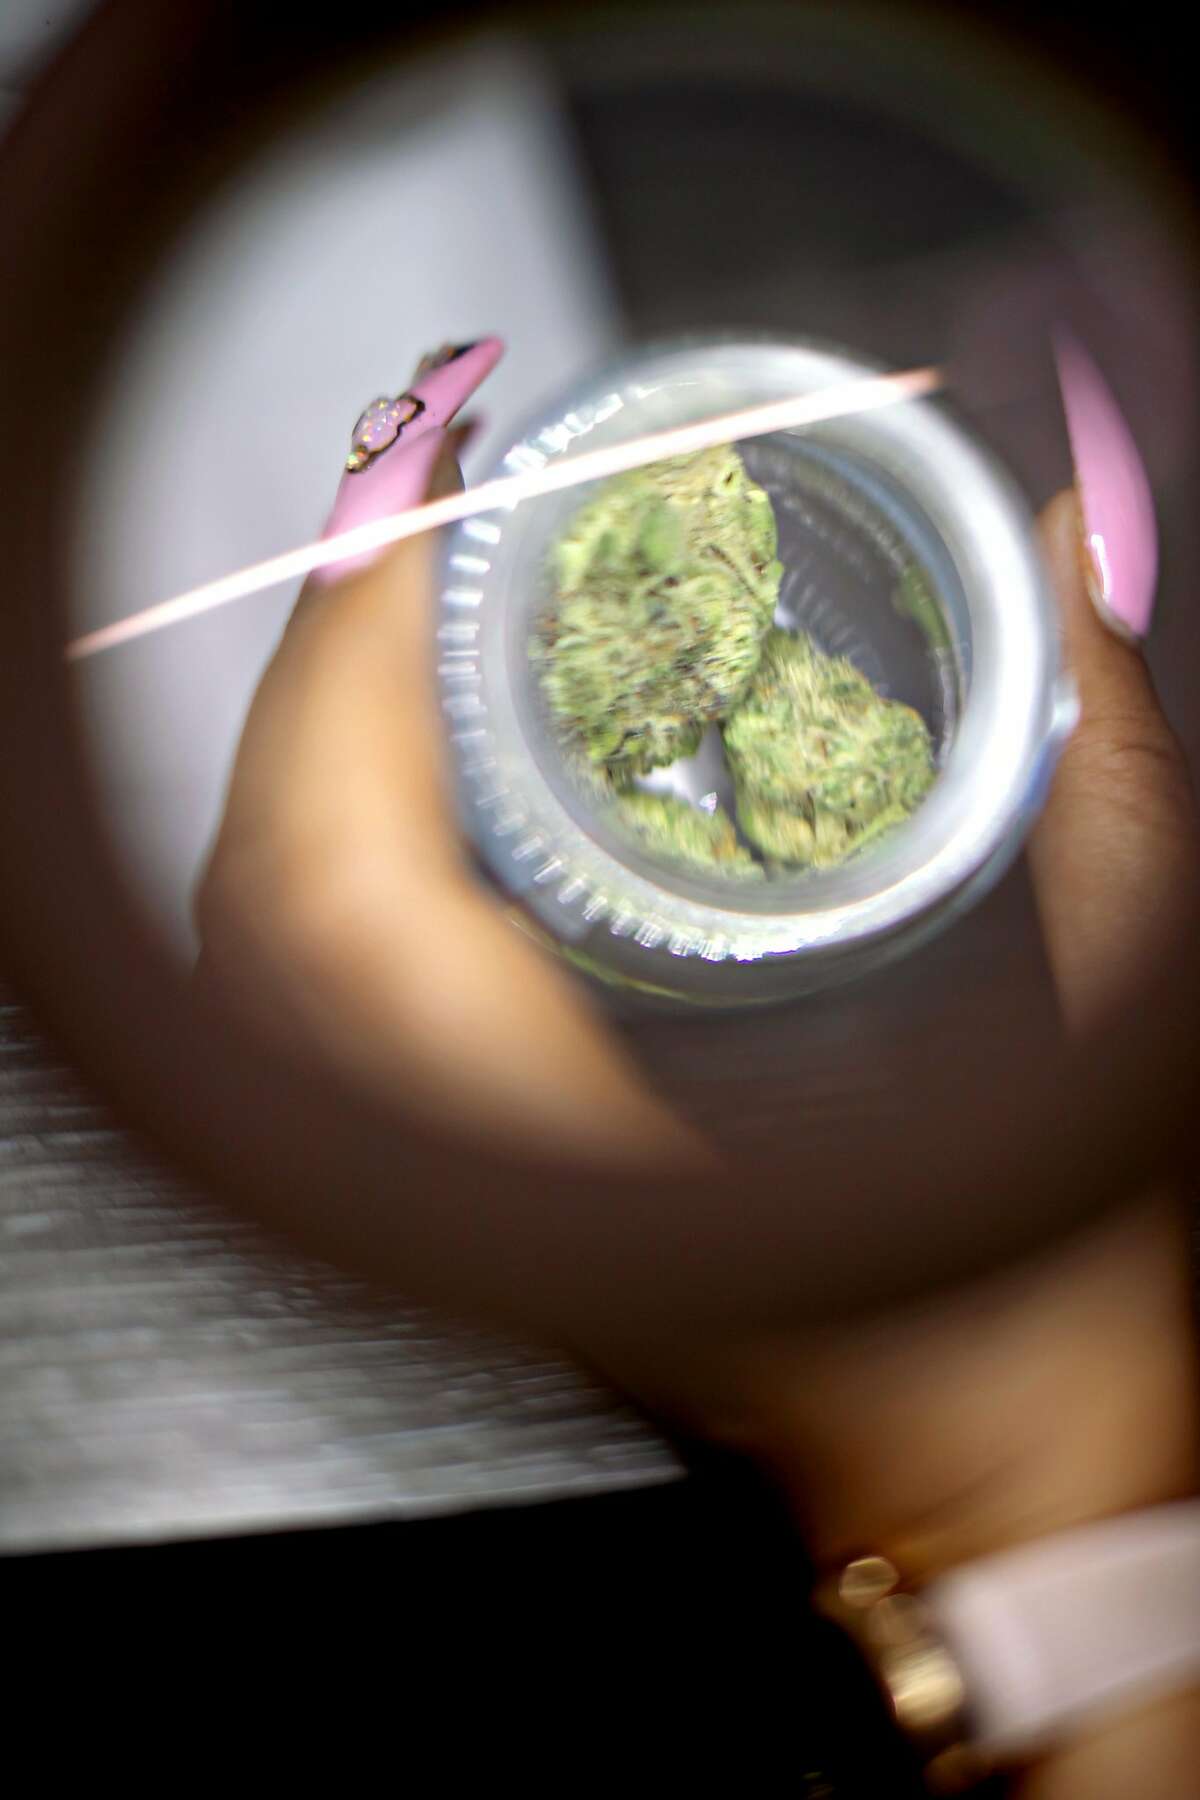 �Cookies� under a magnifying glass at Blunts and Moore, a cannabis store under Oakland�s equity program, on Wednesday, May 22, 2019, in Oakland, Calif.